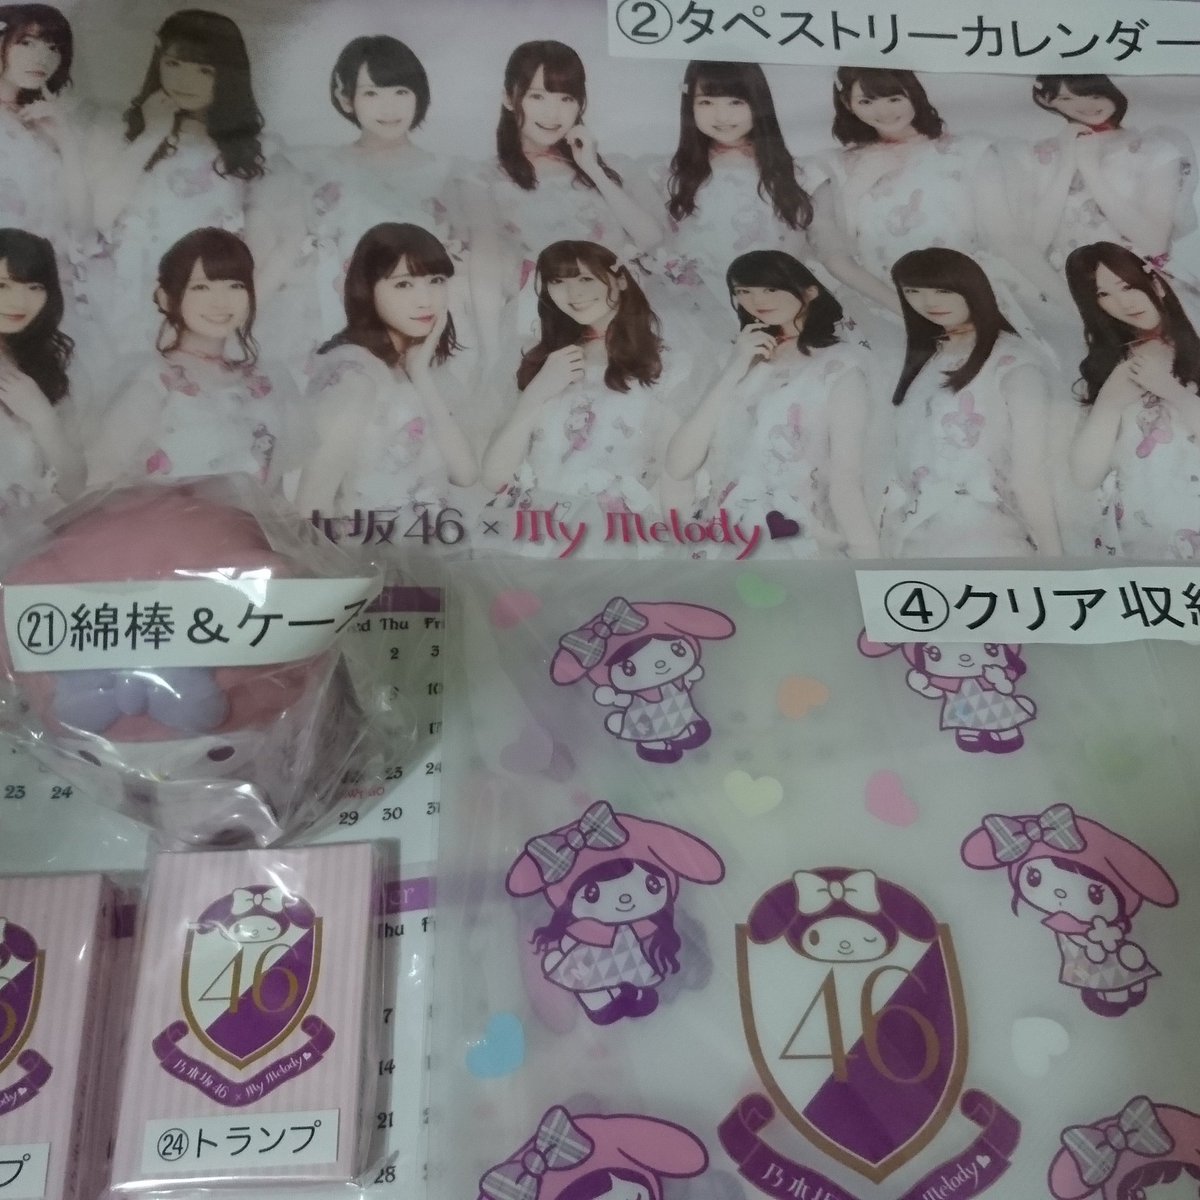 Bonus 12 ⊿ 7-Eleven Nogizaka46 x My Melody Ichiban KujiHere's a pretty obscure one for you! Back in 2016 Nogizaka did a collaboration Kuji with Sanrio character My Melody for 7-Eleven. So they wore costumes inspired by the character! https://twitter.com/korobizaka/status/1272281248191447040?s=20